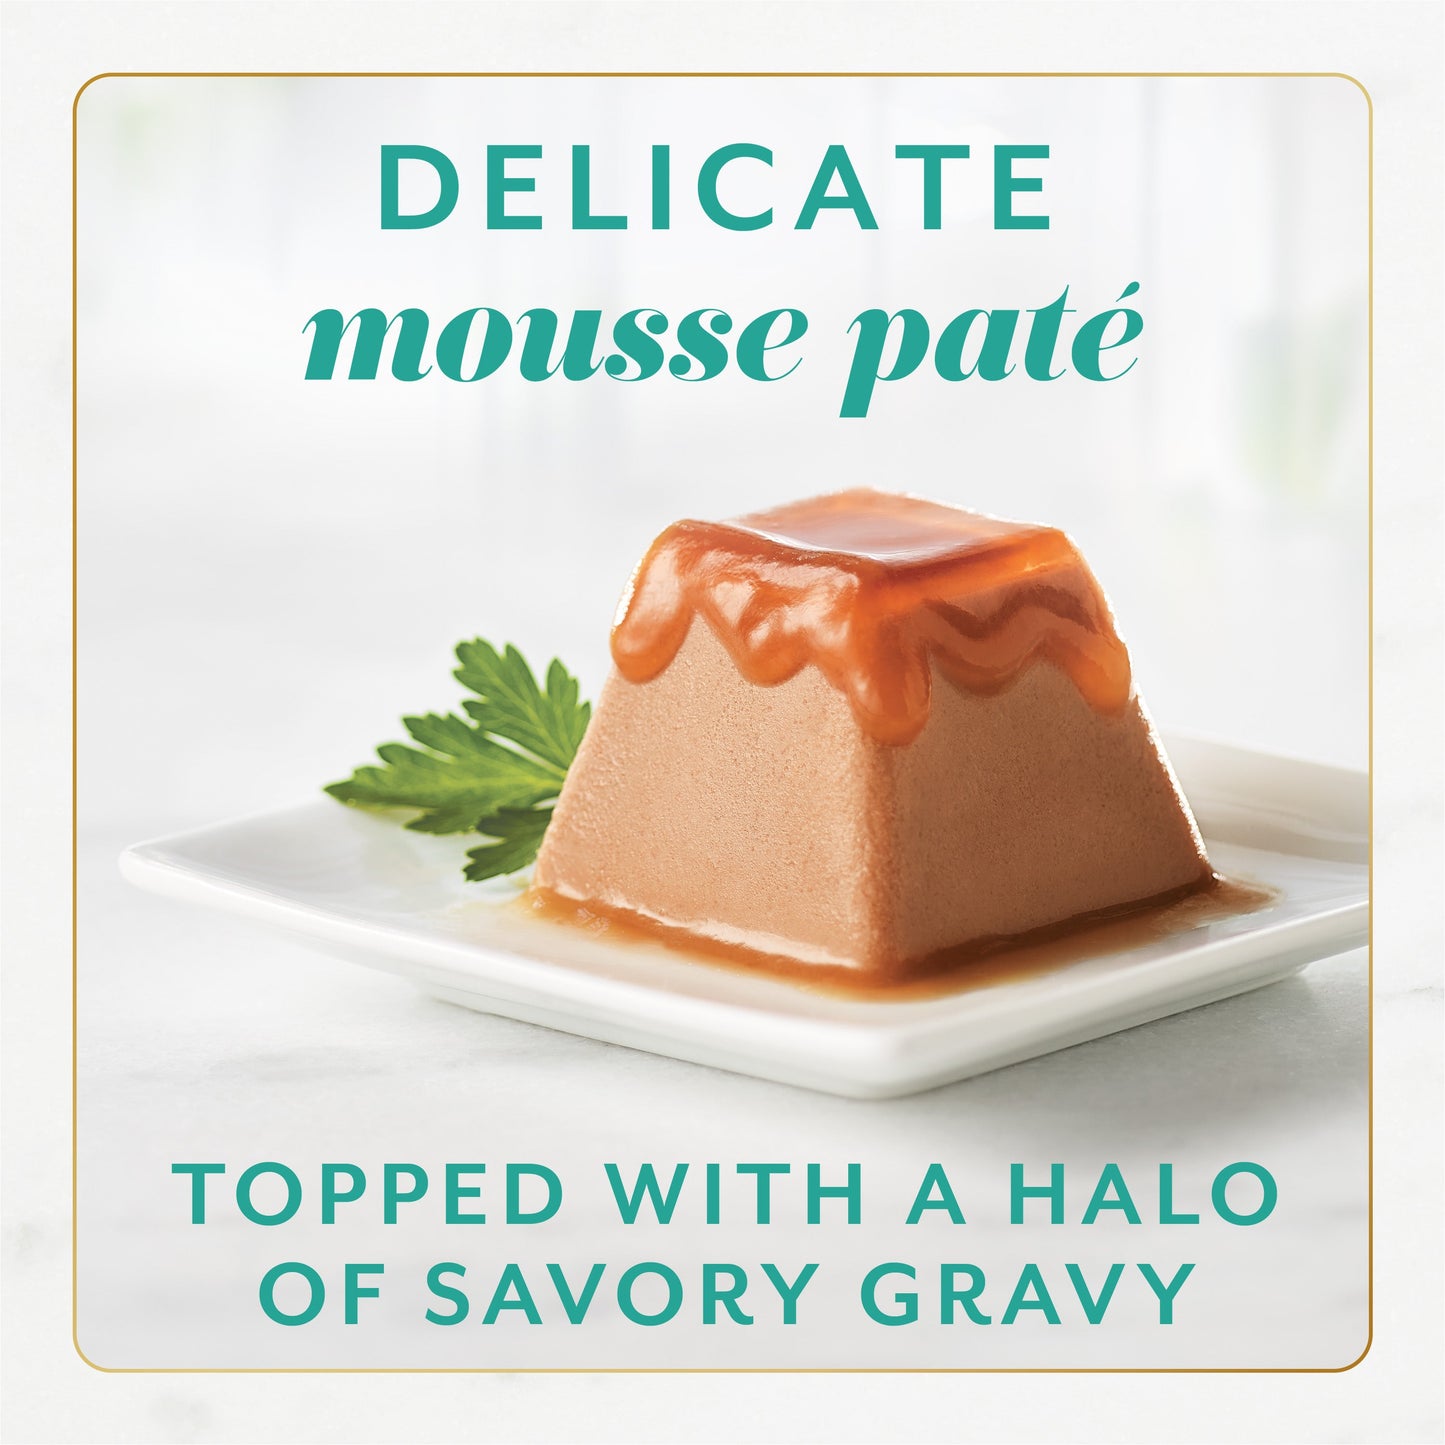 Fancy Feast Gems delicate tuna mousse pate topped with a halo of savory gravy